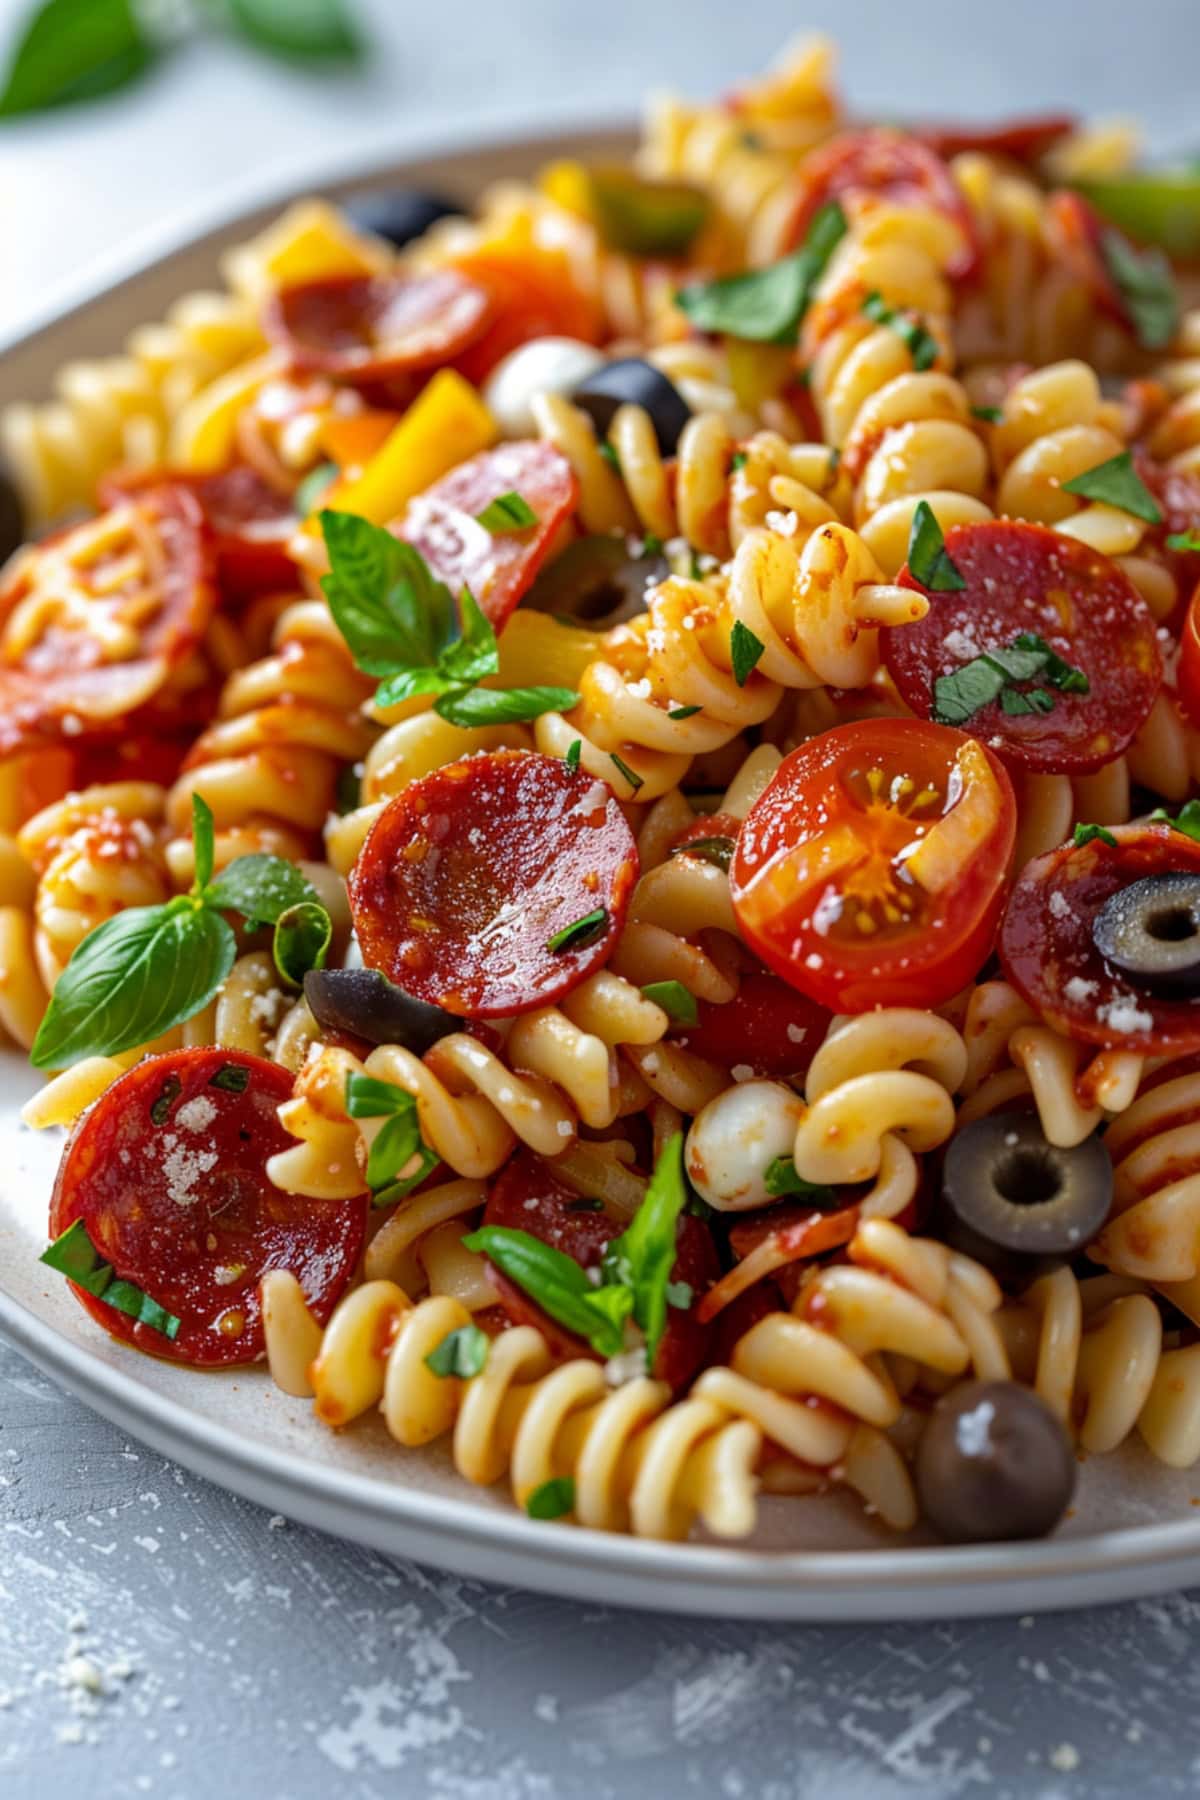 A serving of pepperoni pasta salad made with rotini pasta, pepperoni and mozzarella pearls served on a white plate.